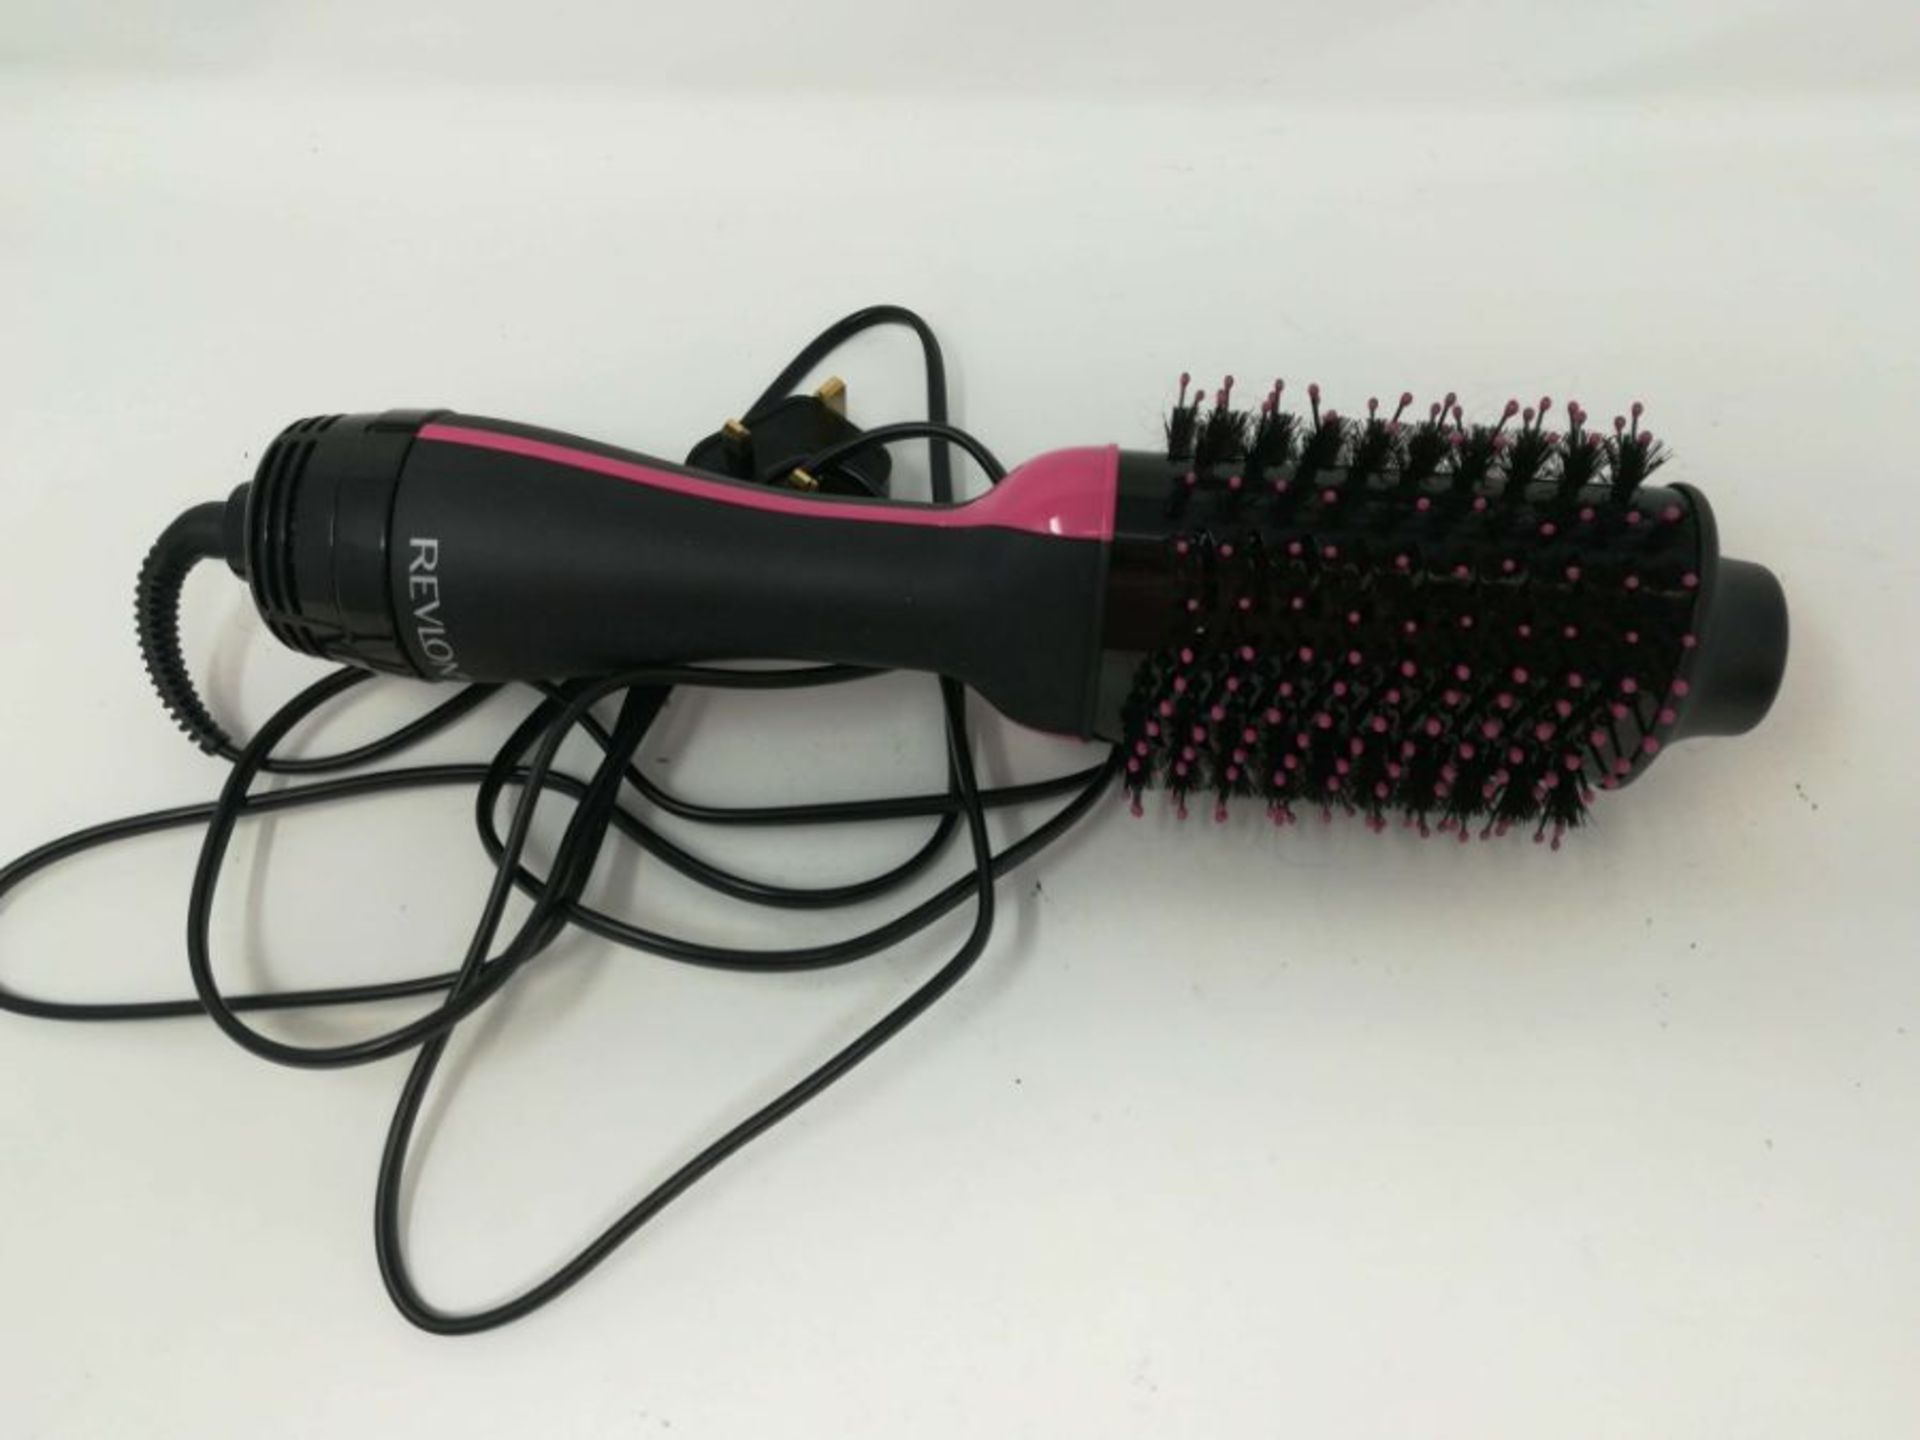 Revlon Salon One- Step Volumizer for mid to long hair (2-in-1 styling tool, dryer and - Image 2 of 2